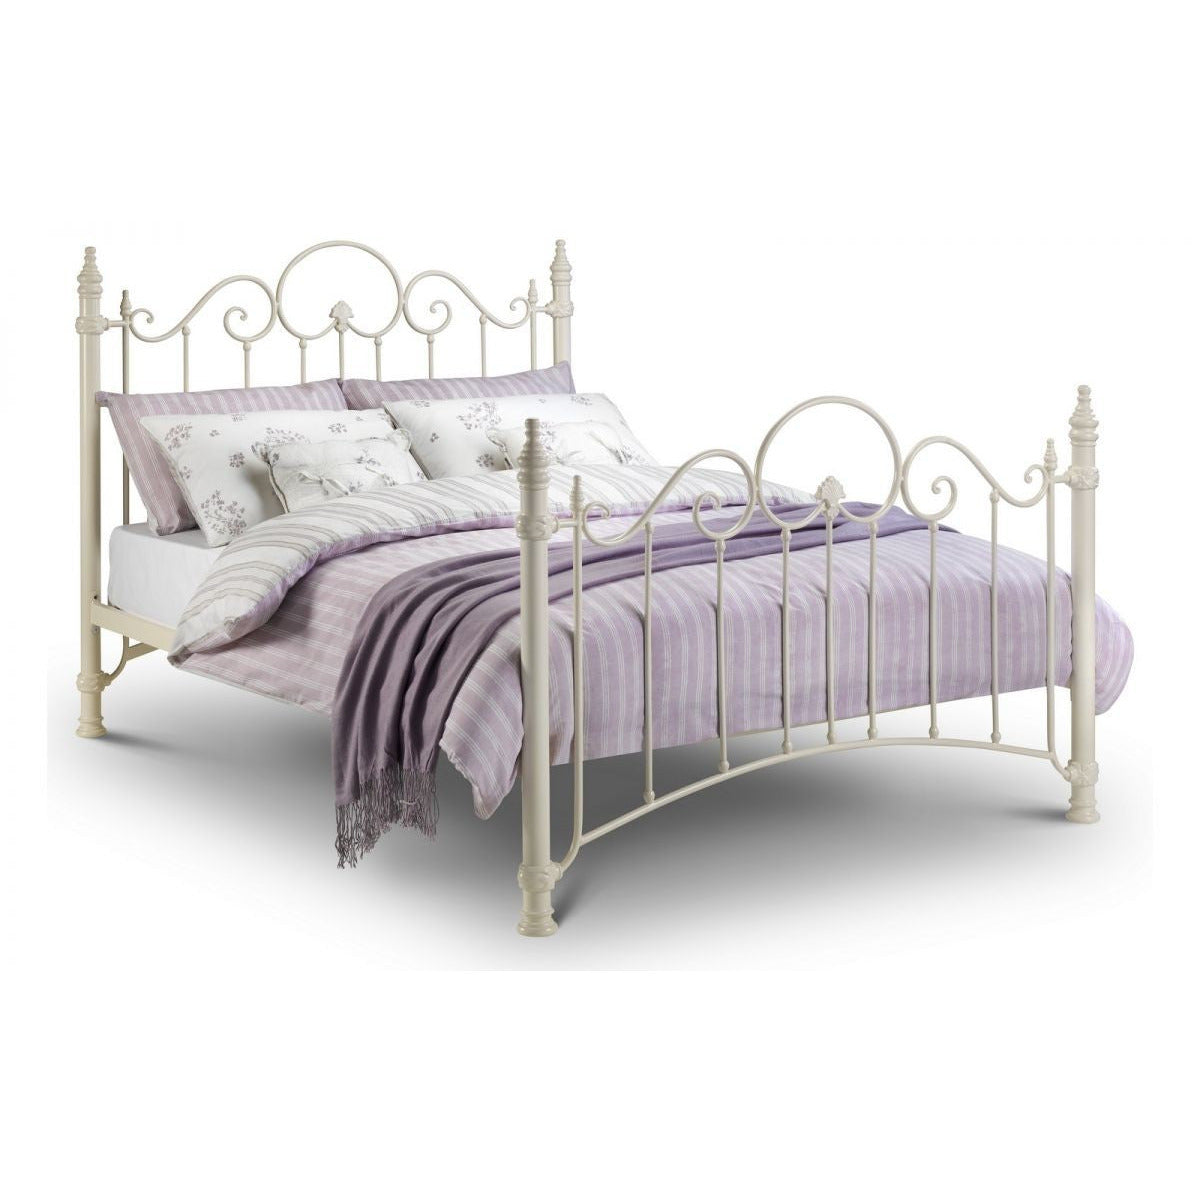 FLORENCE BED TRADITIONAL VICTORIAN DESIGN